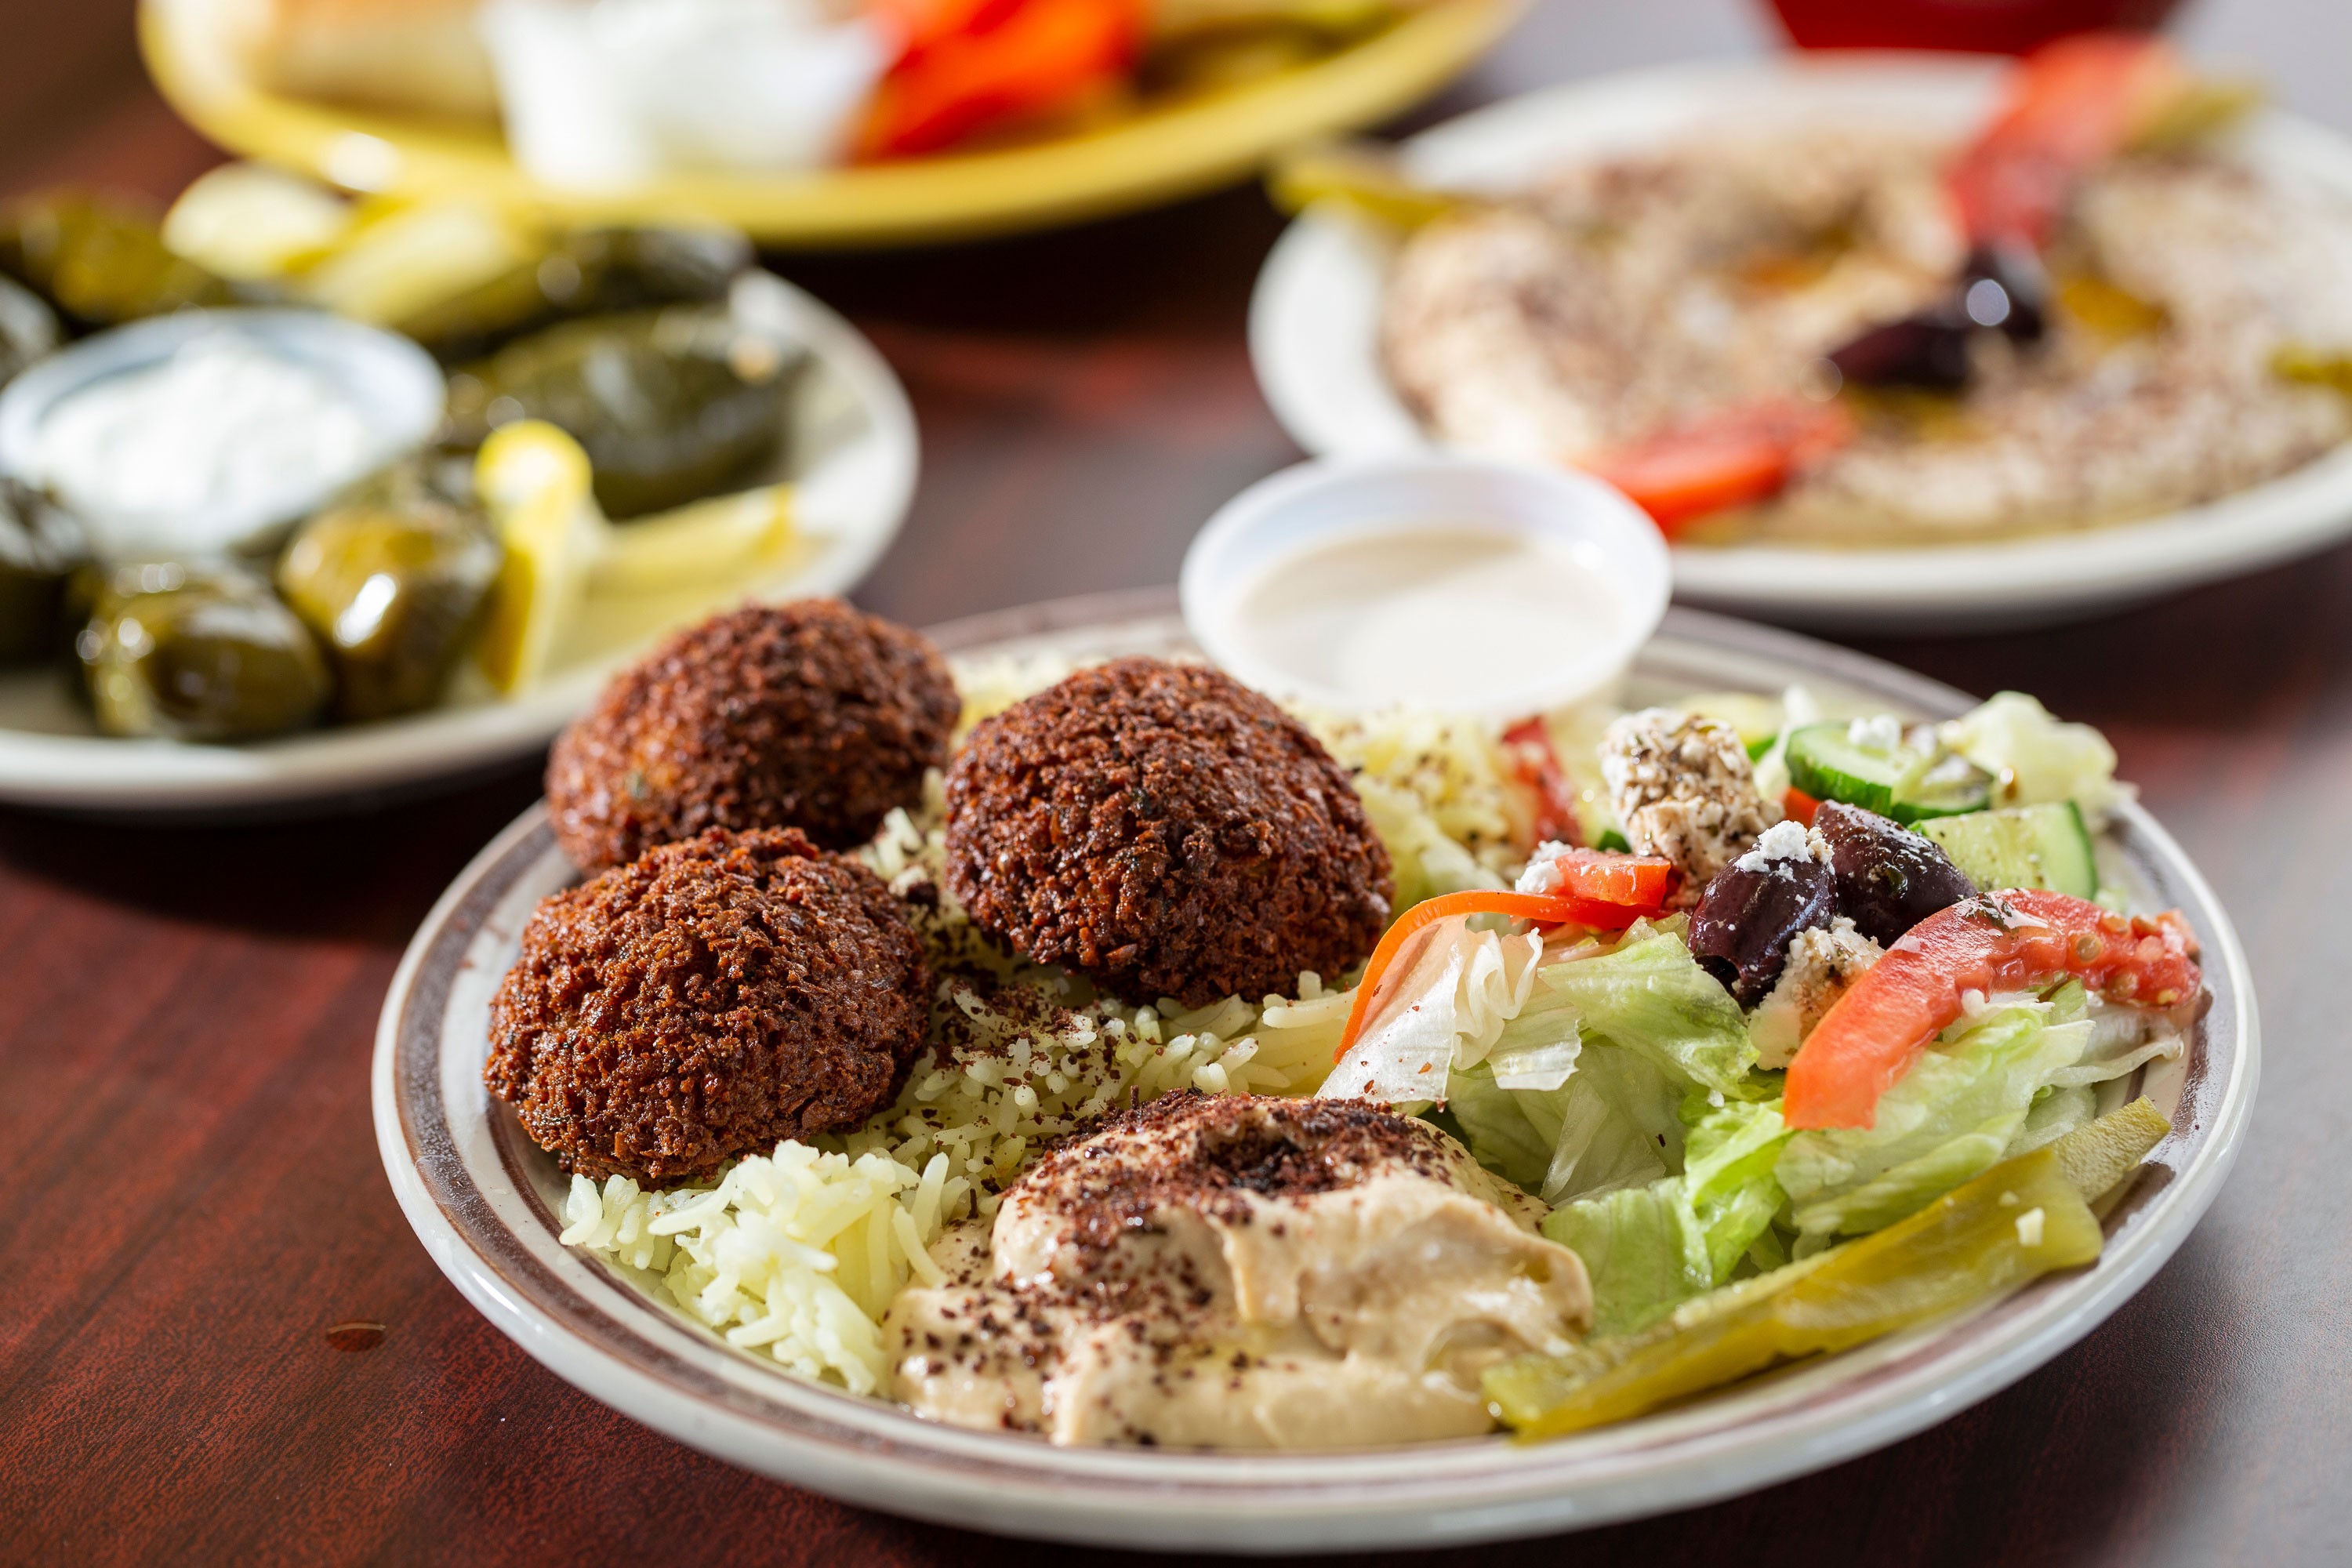 Falafel served with hummus, saffron rice, a Greek salad, and tahini sauce at Cafe Istanbul.